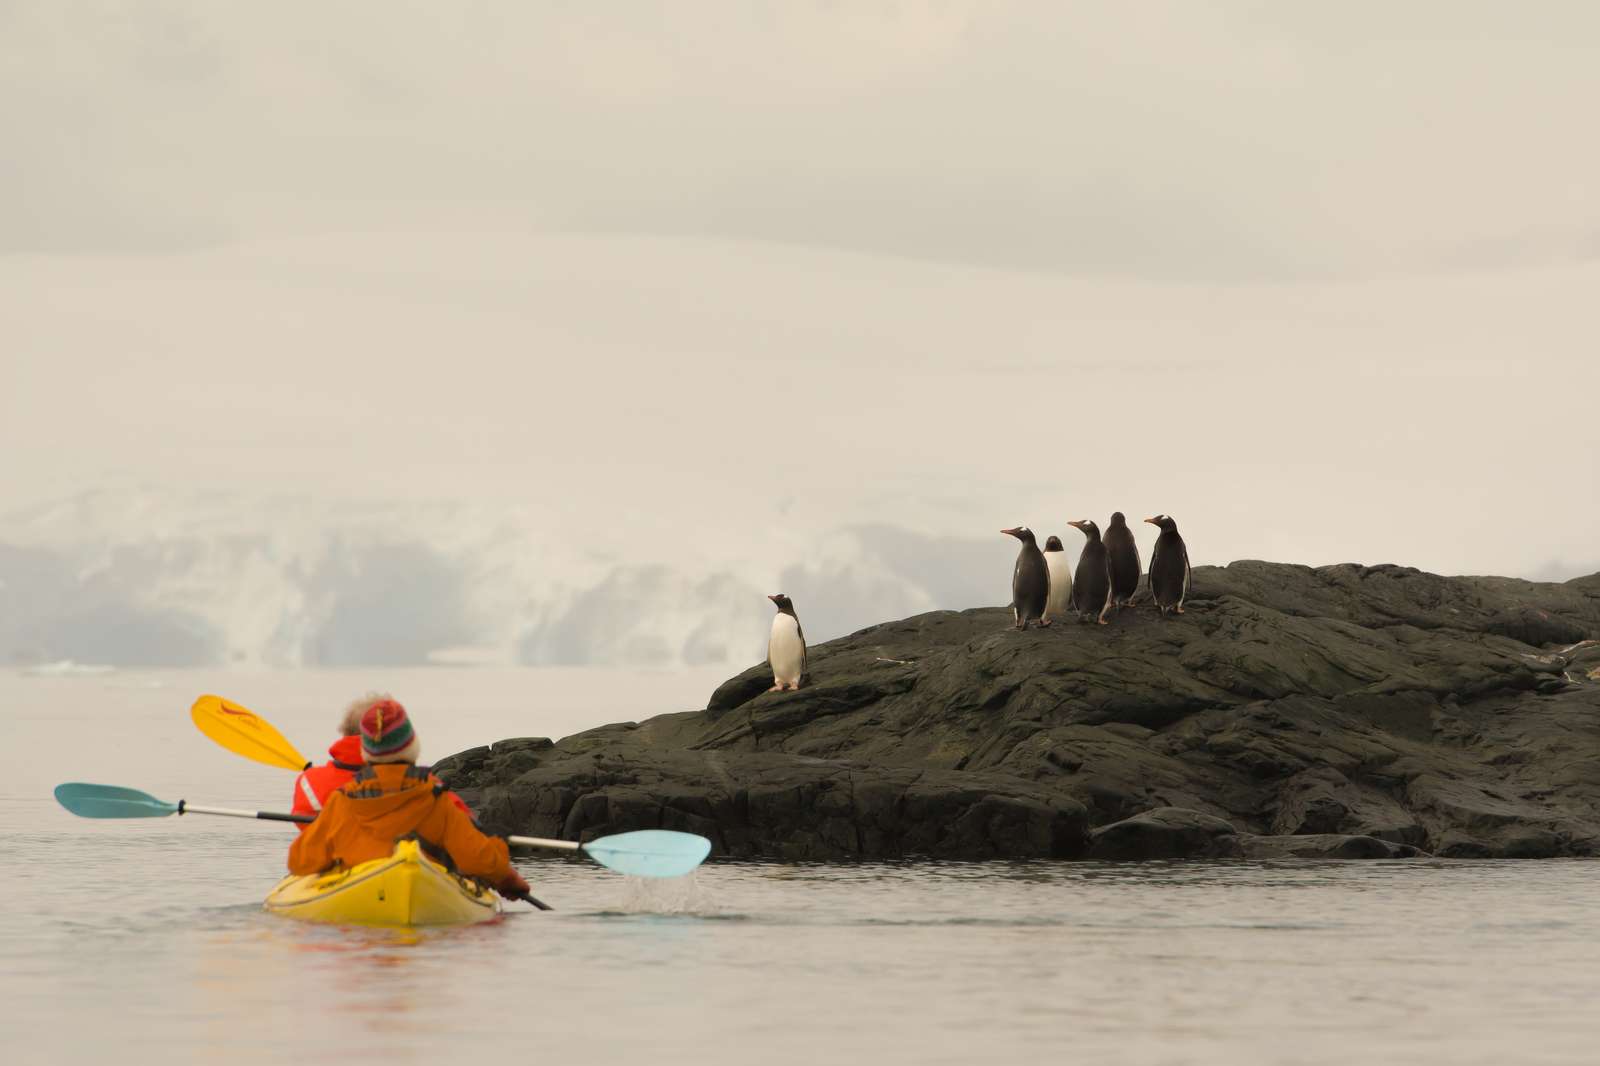 Kayakers observe a waddle of penguins in Antarctica